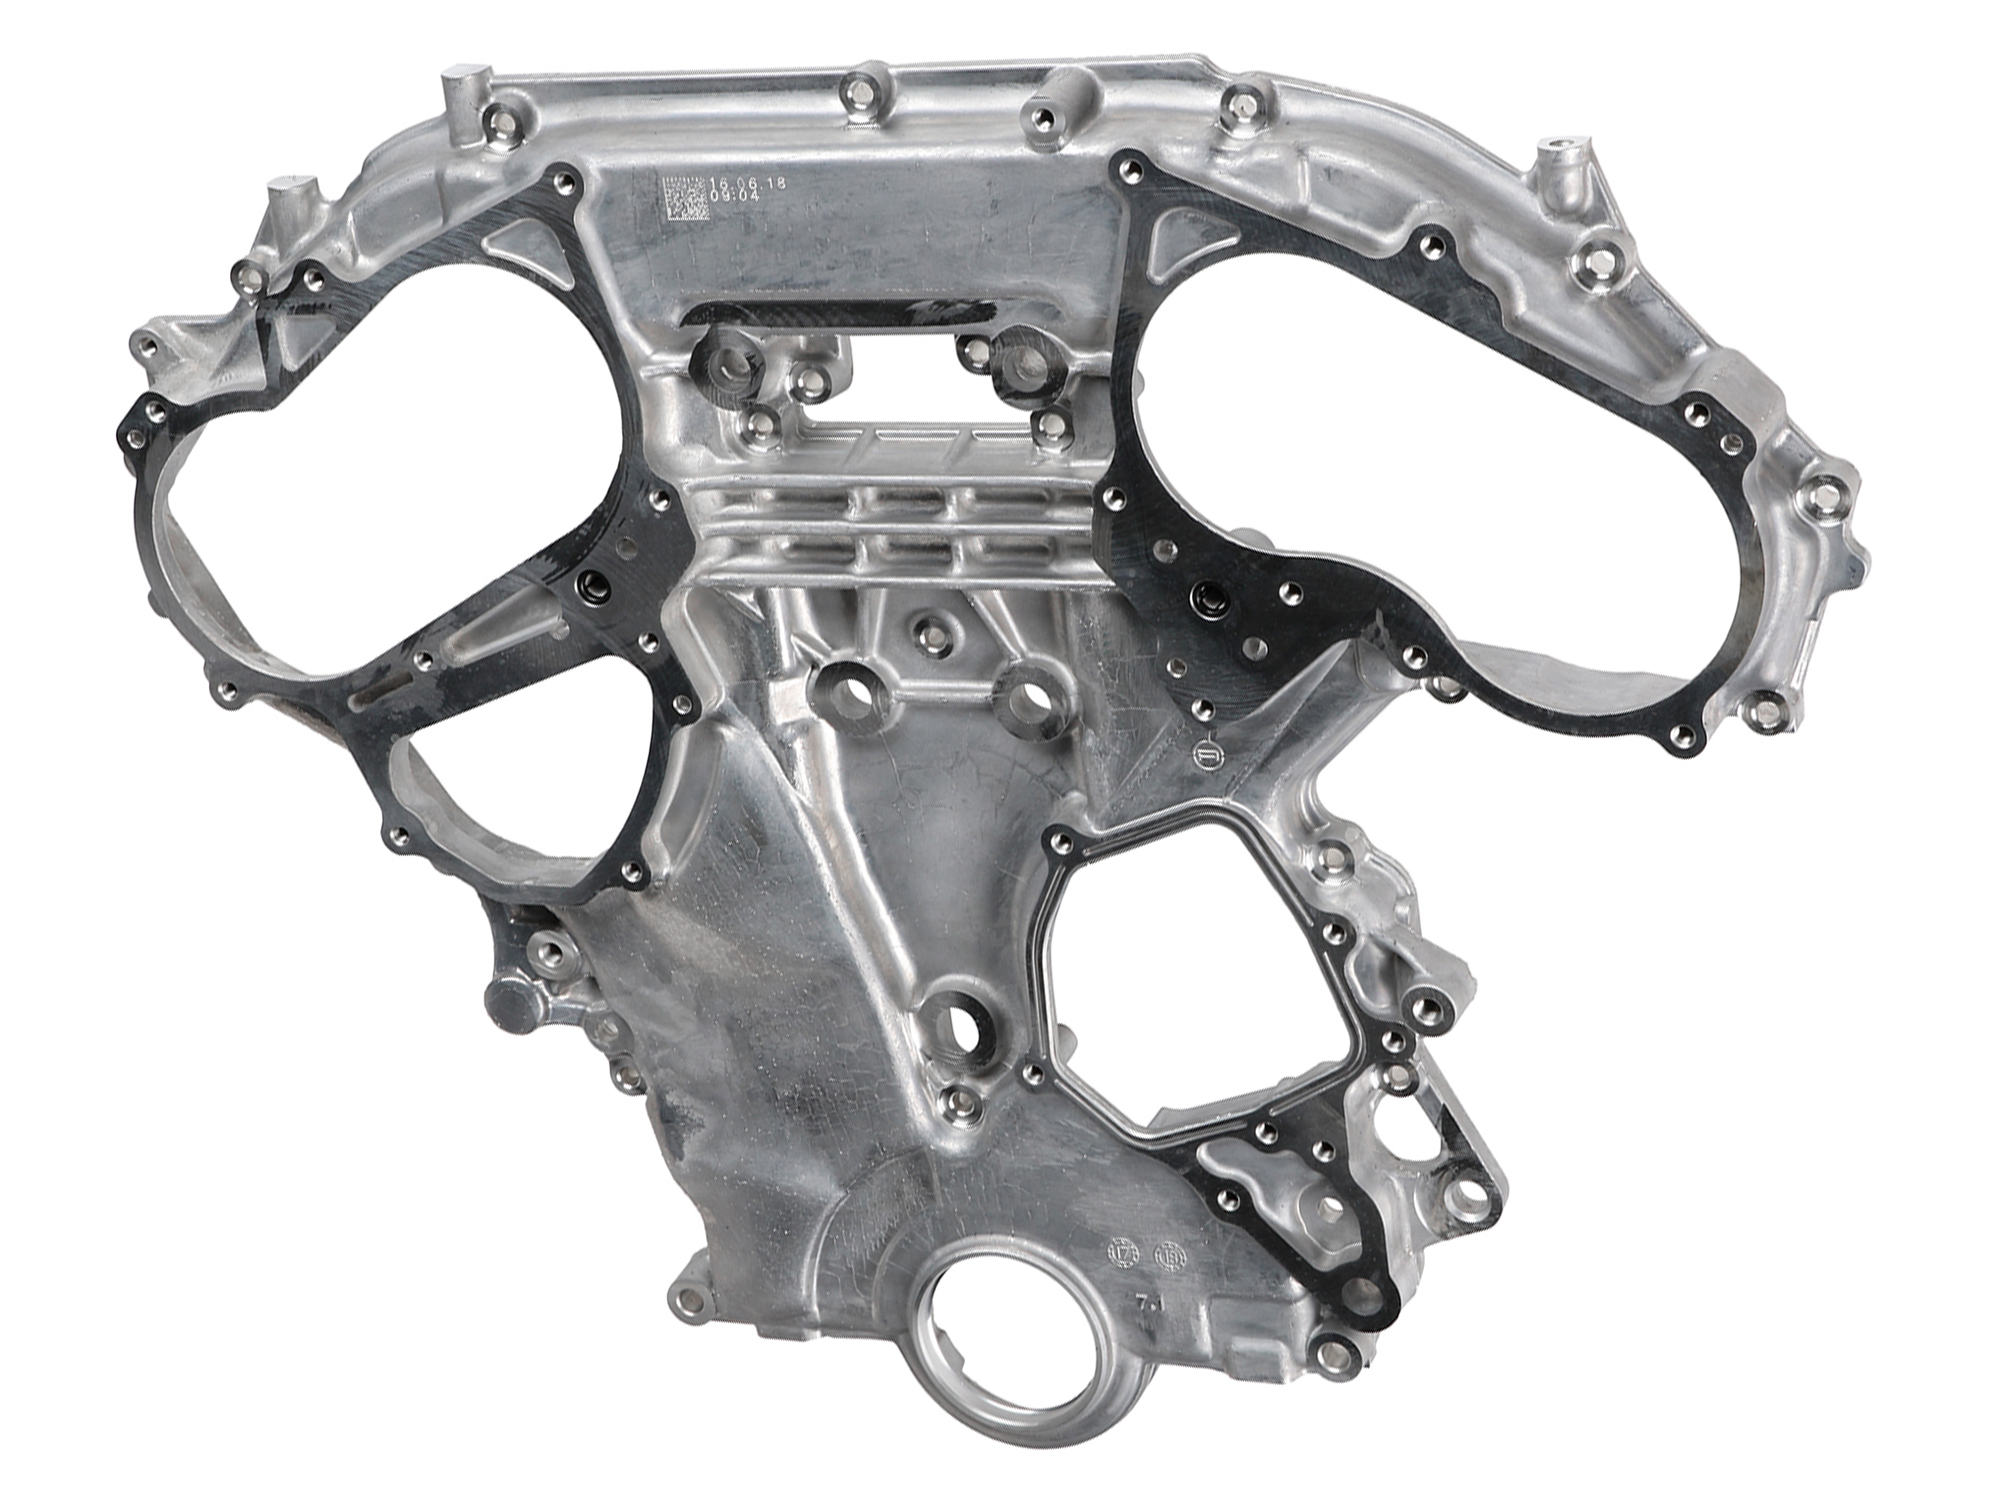 OEM '13-'20 QX60 / Pathfinder Front Timing Cover